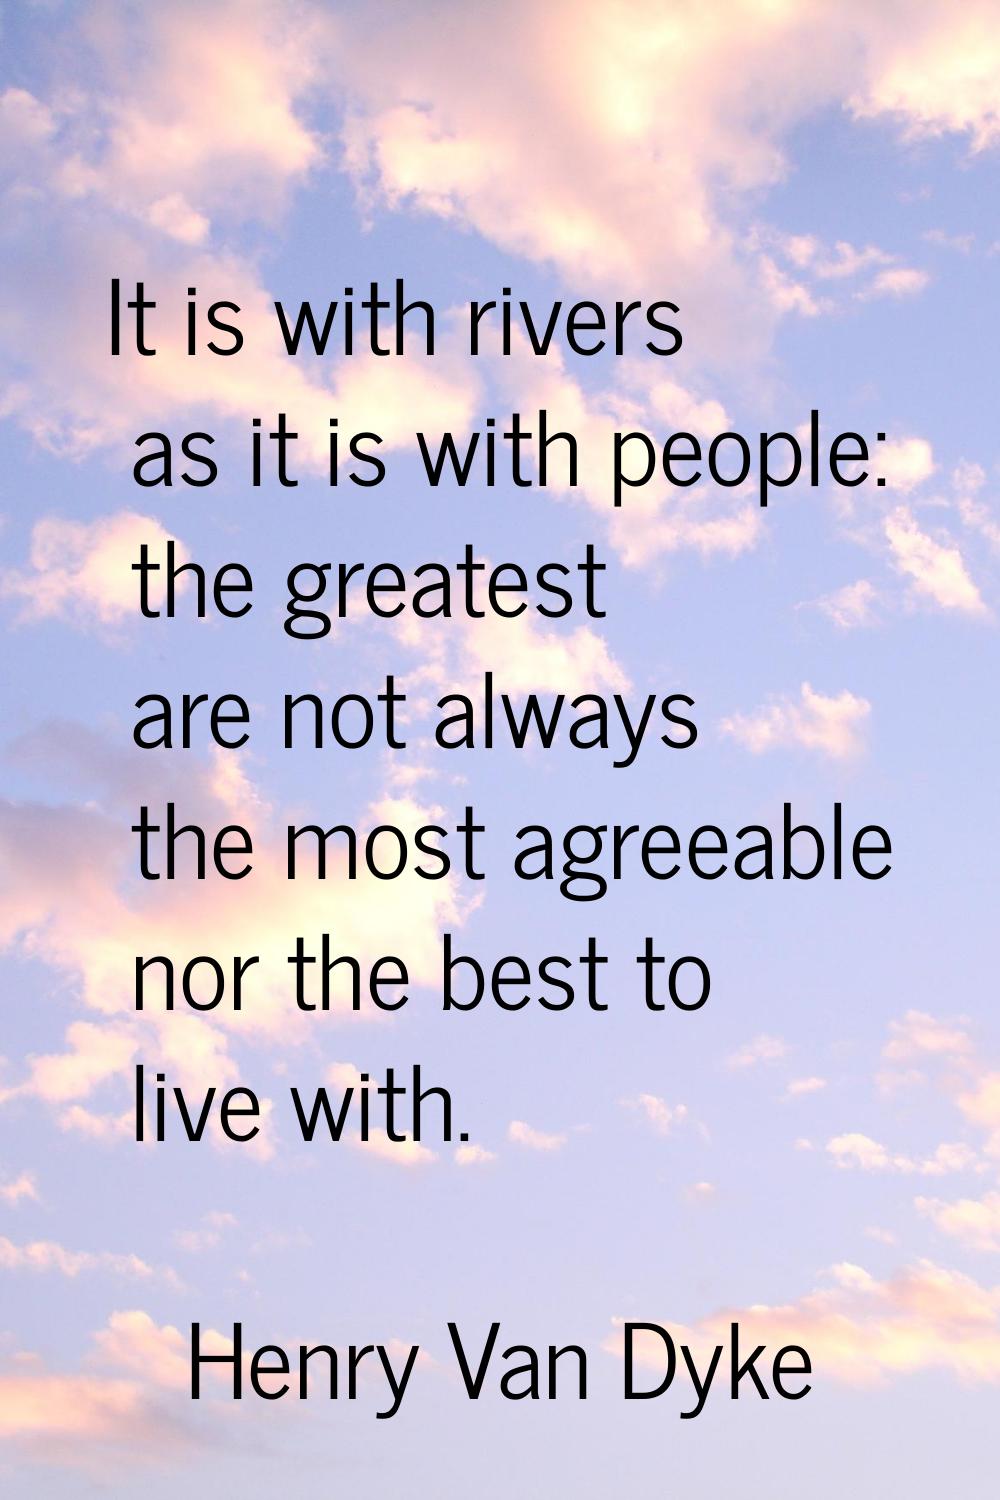 It is with rivers as it is with people: the greatest are not always the most agreeable nor the best